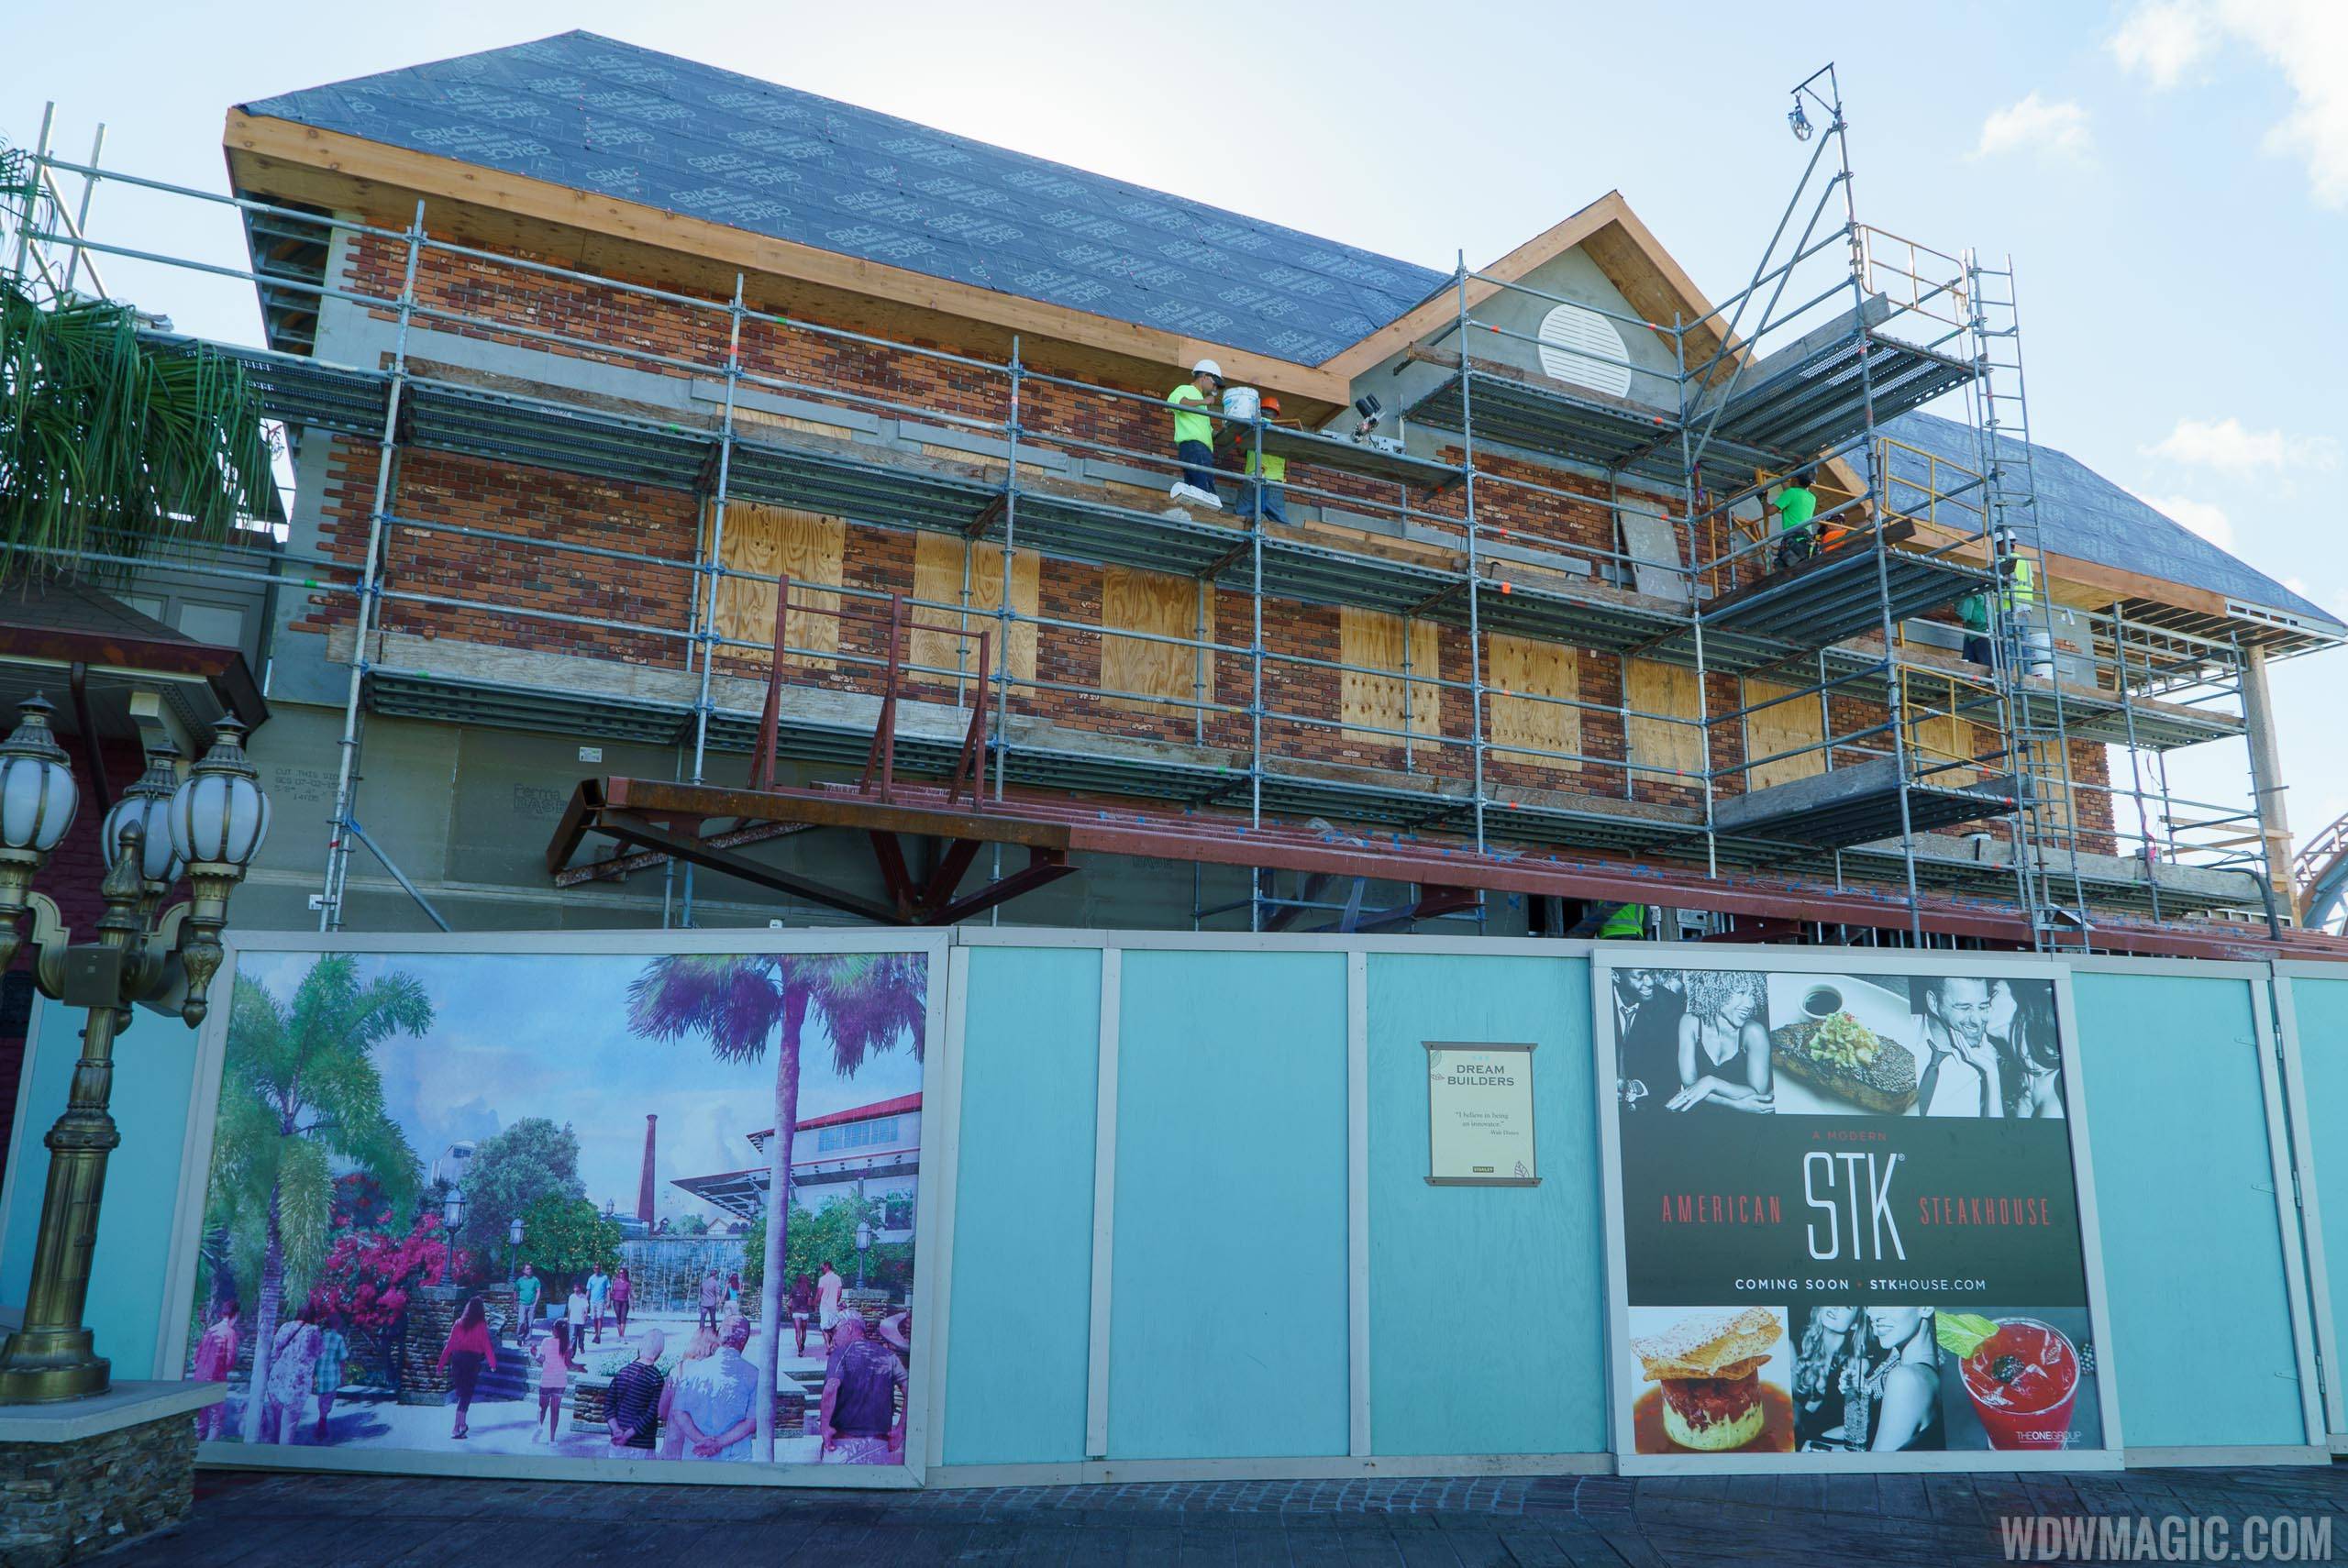 PHOTOS - Latest look at the construction of STK Orlando at Disney Springs